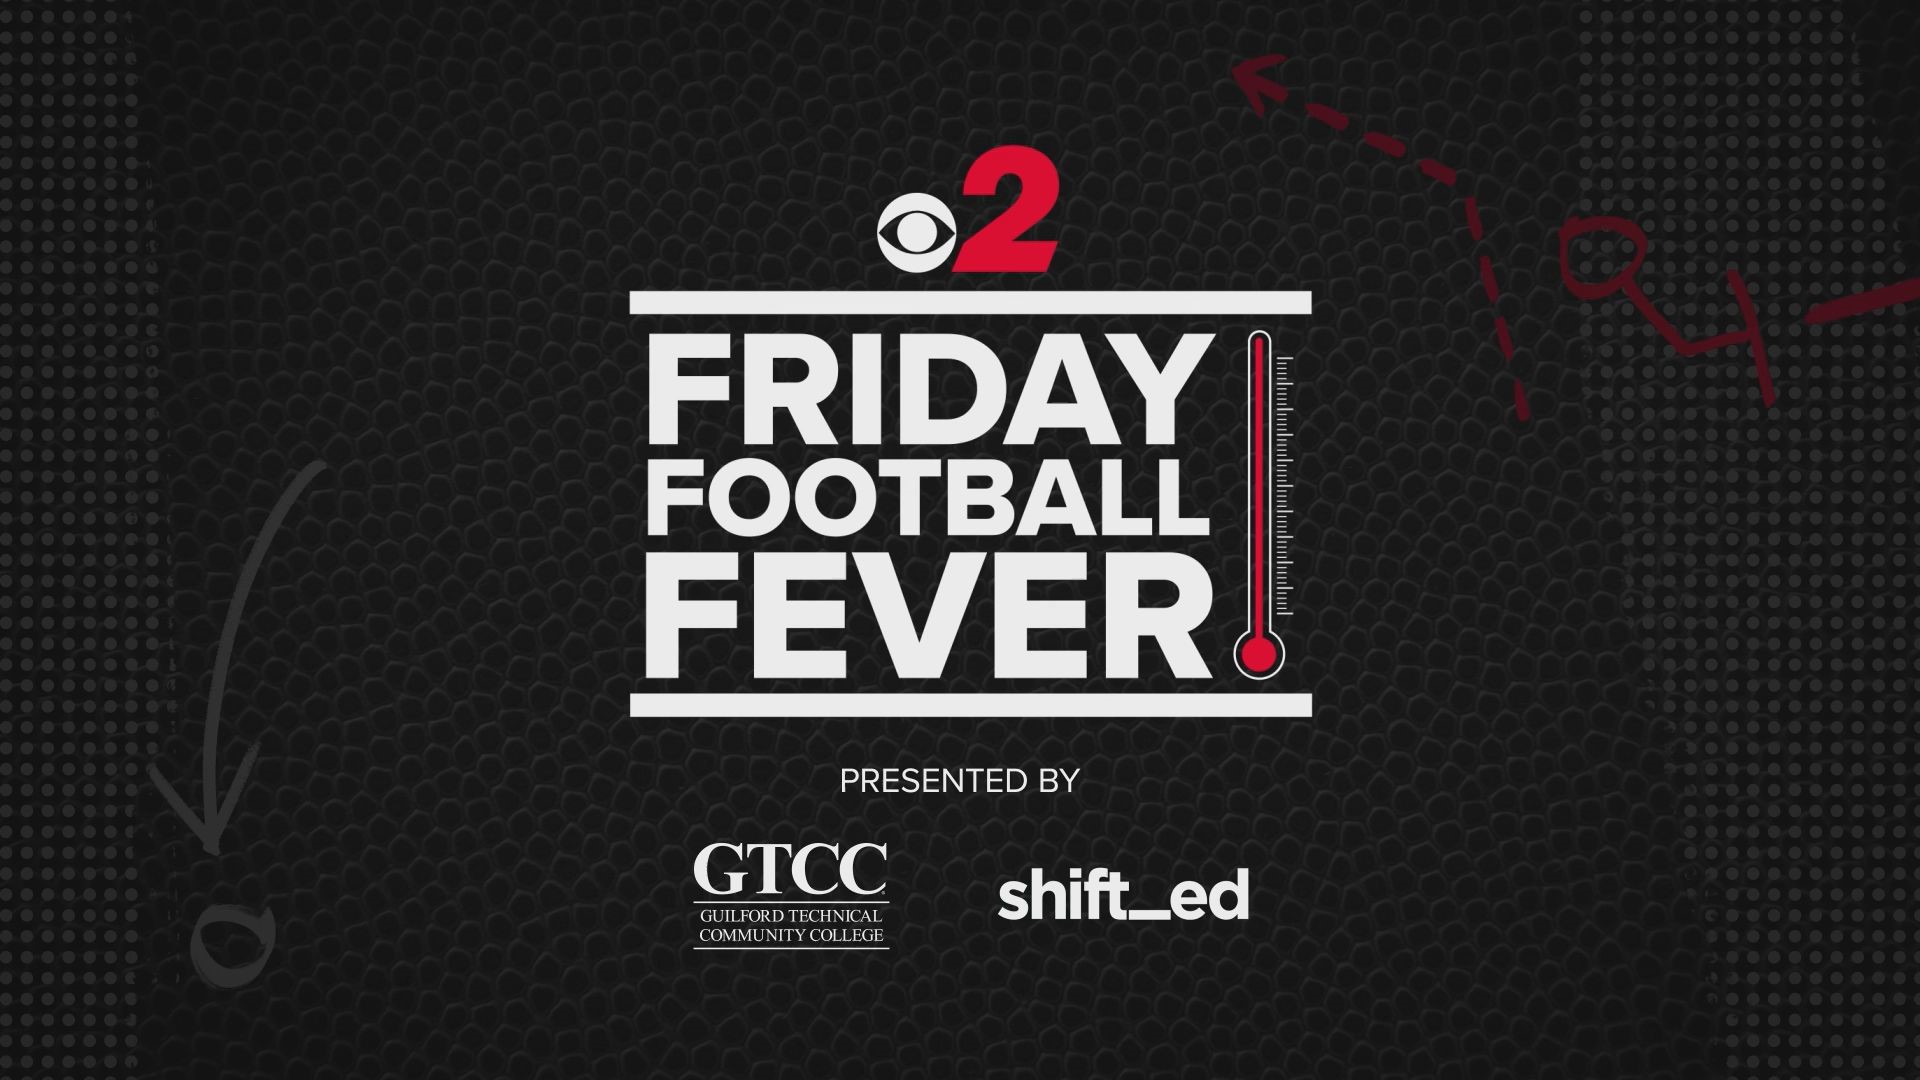 The Tackles, the tosses, and the touchdowns. Friday night football fever is here! Get in the game.